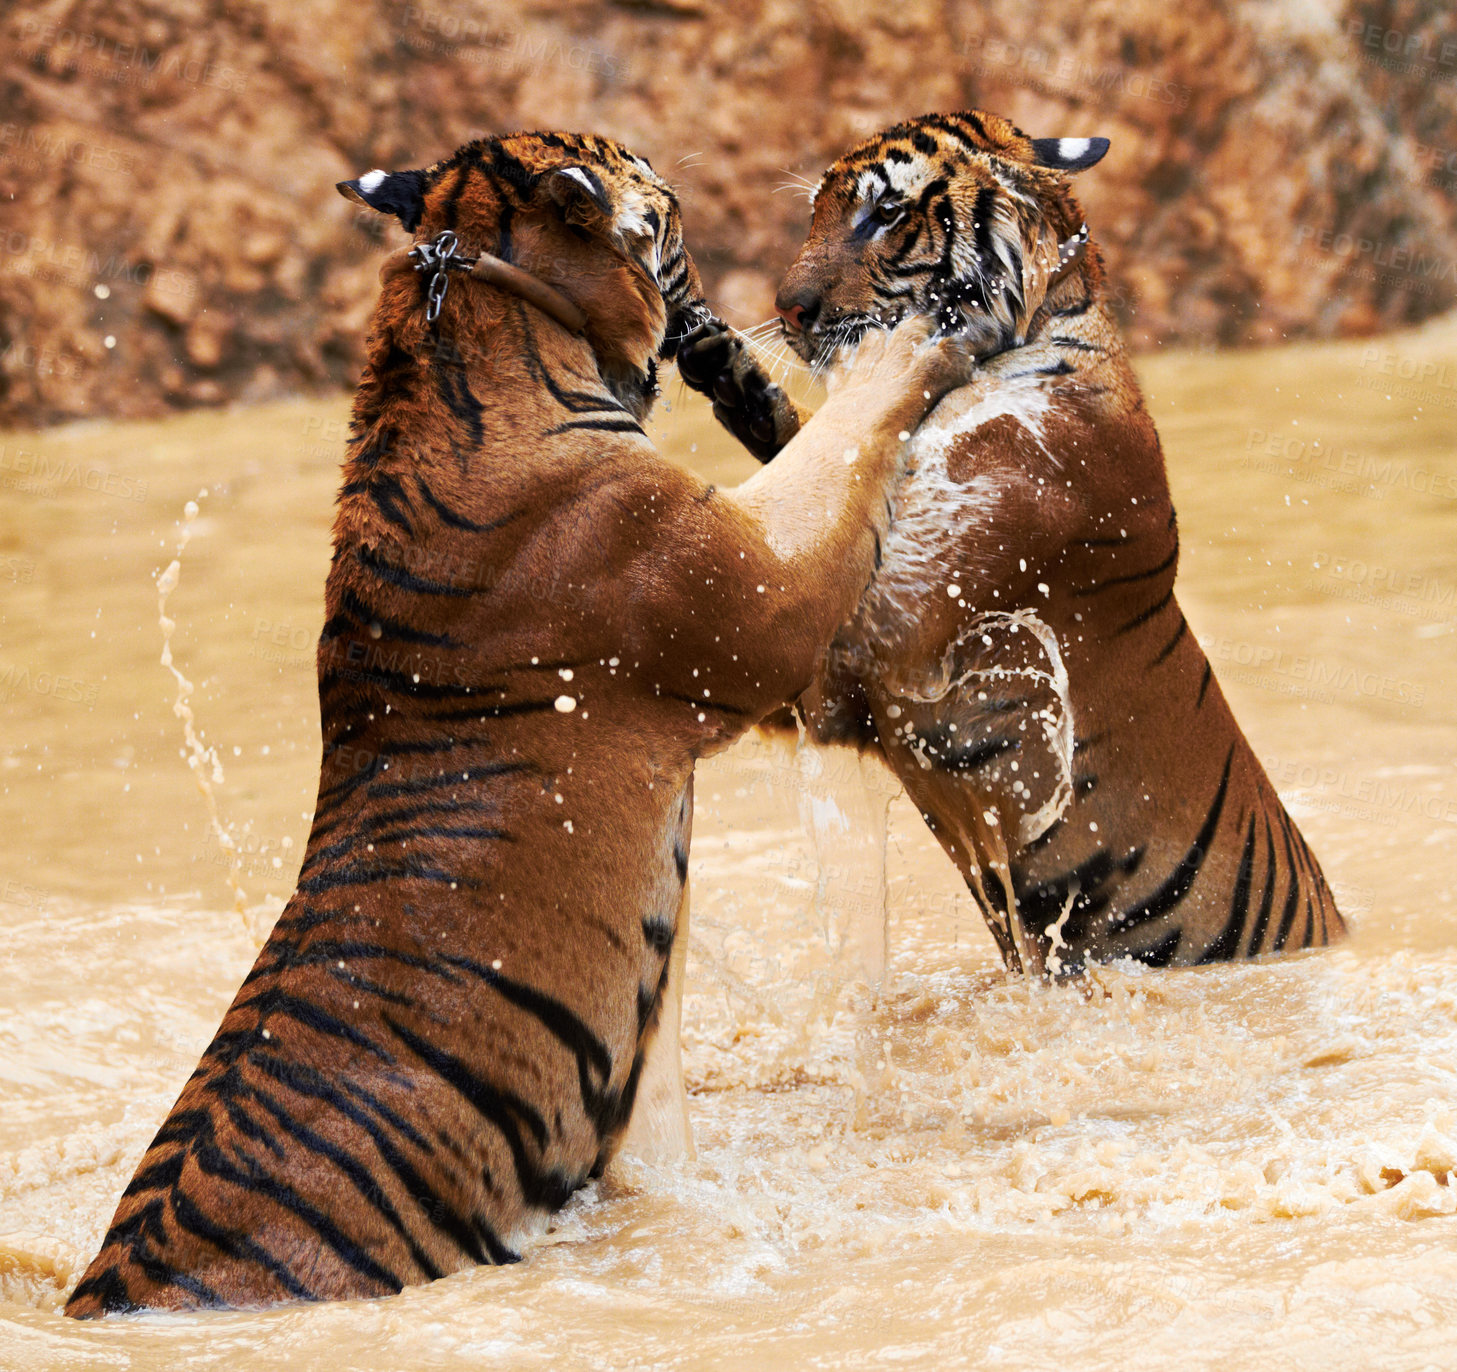 Buy stock photo Nature, animals and tiger fight in lake with playful jump in mud, fun and endangered wildlife safari. Asian big cats playing together in park, river or water in Thailand, outdoor action and power.